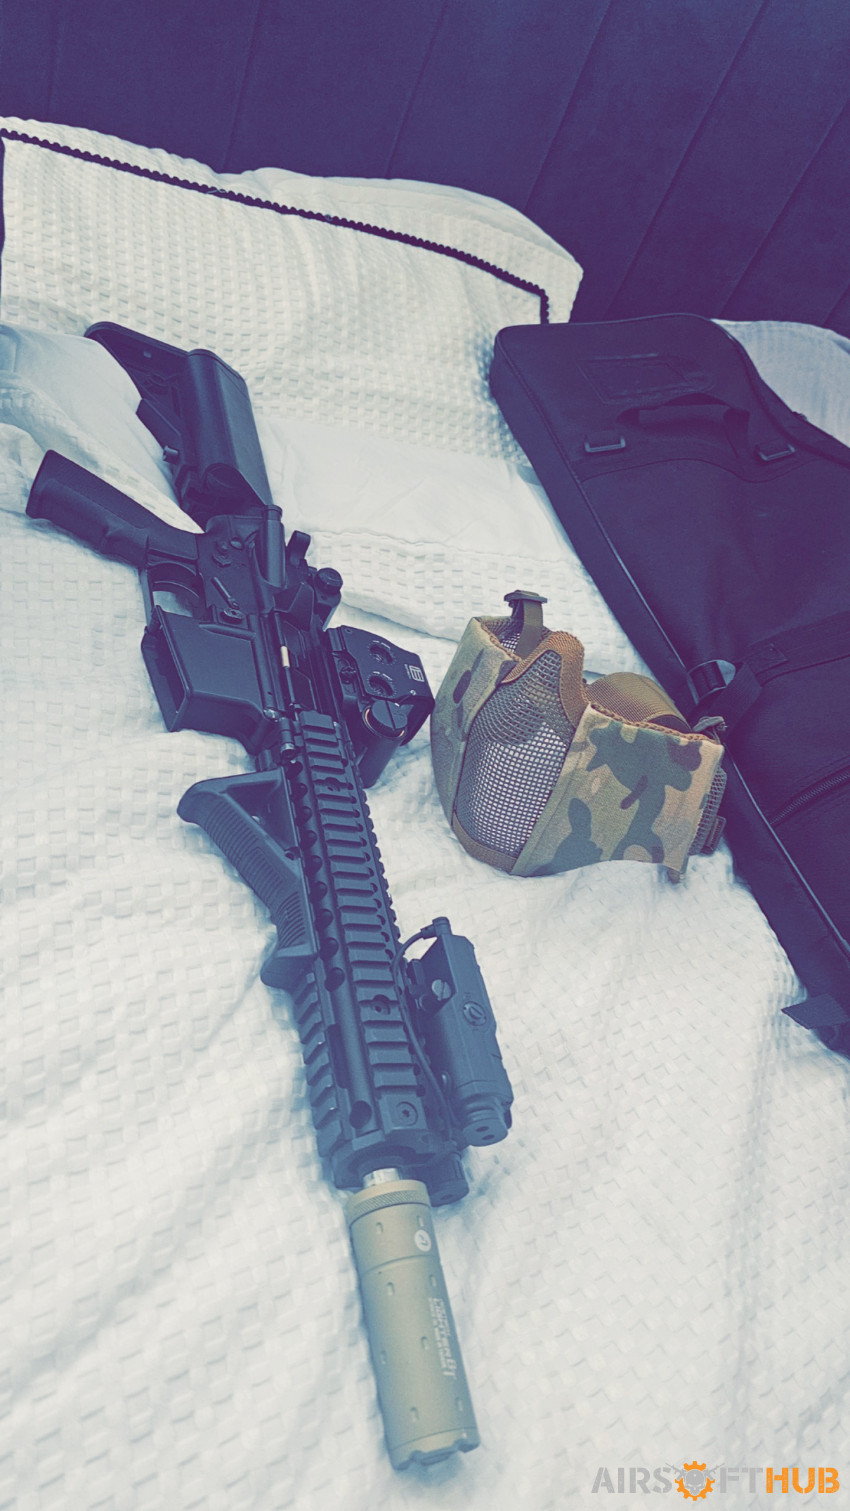 Golden Eagle mk18 gbb - Used airsoft equipment